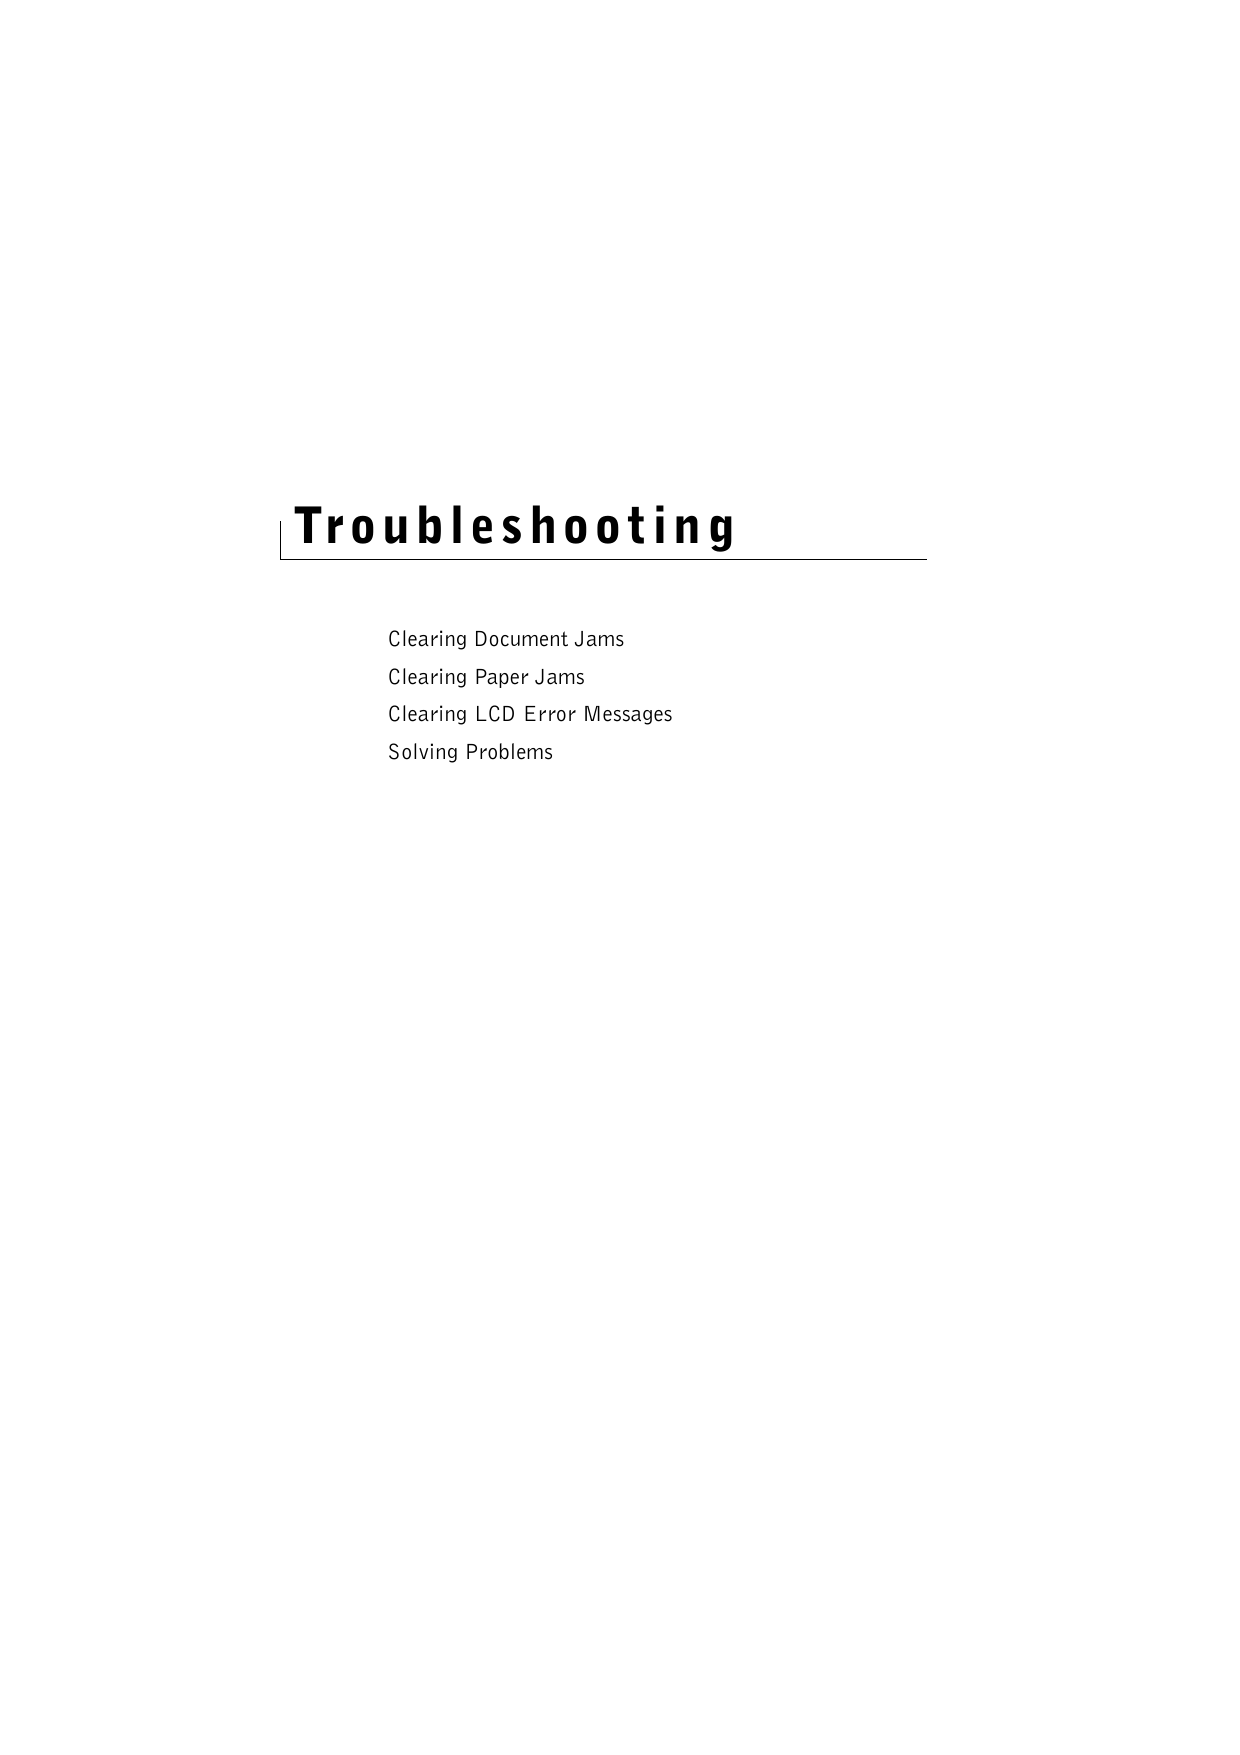 TroubleshootingClearing Document JamsClearing Paper JamsClearing LCD Error MessagesSolving Problems